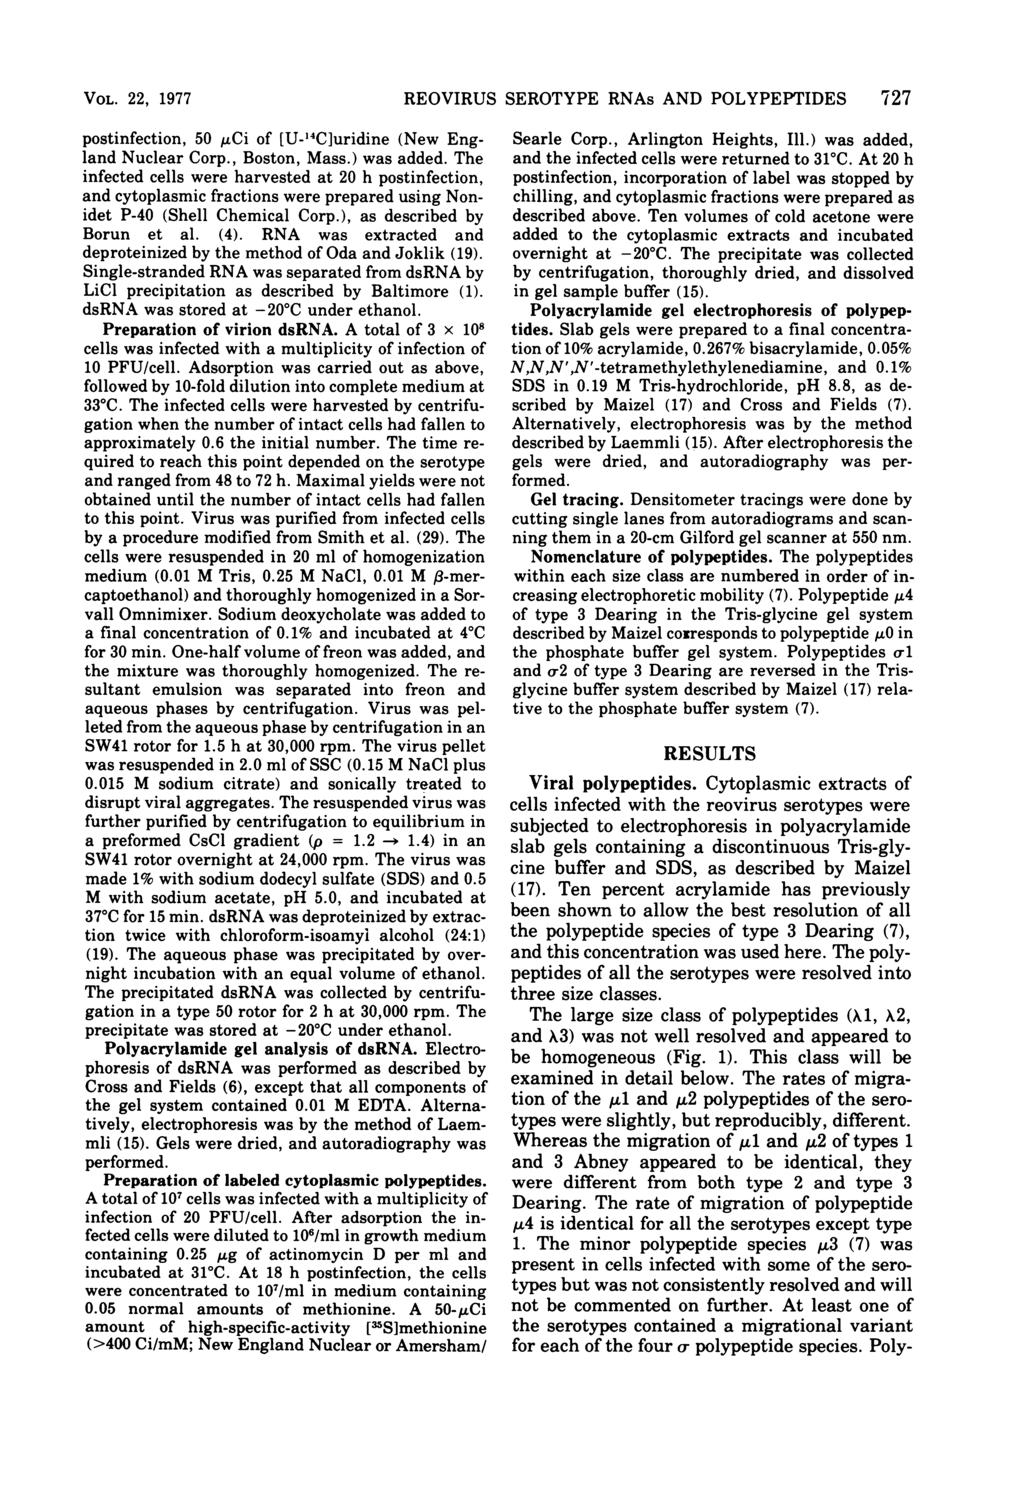 VOL. 22, 1977 postinfection, 50 gci of [U-'4C]uridine (New England Nuclear Corp., Boston, Mass.) was added.